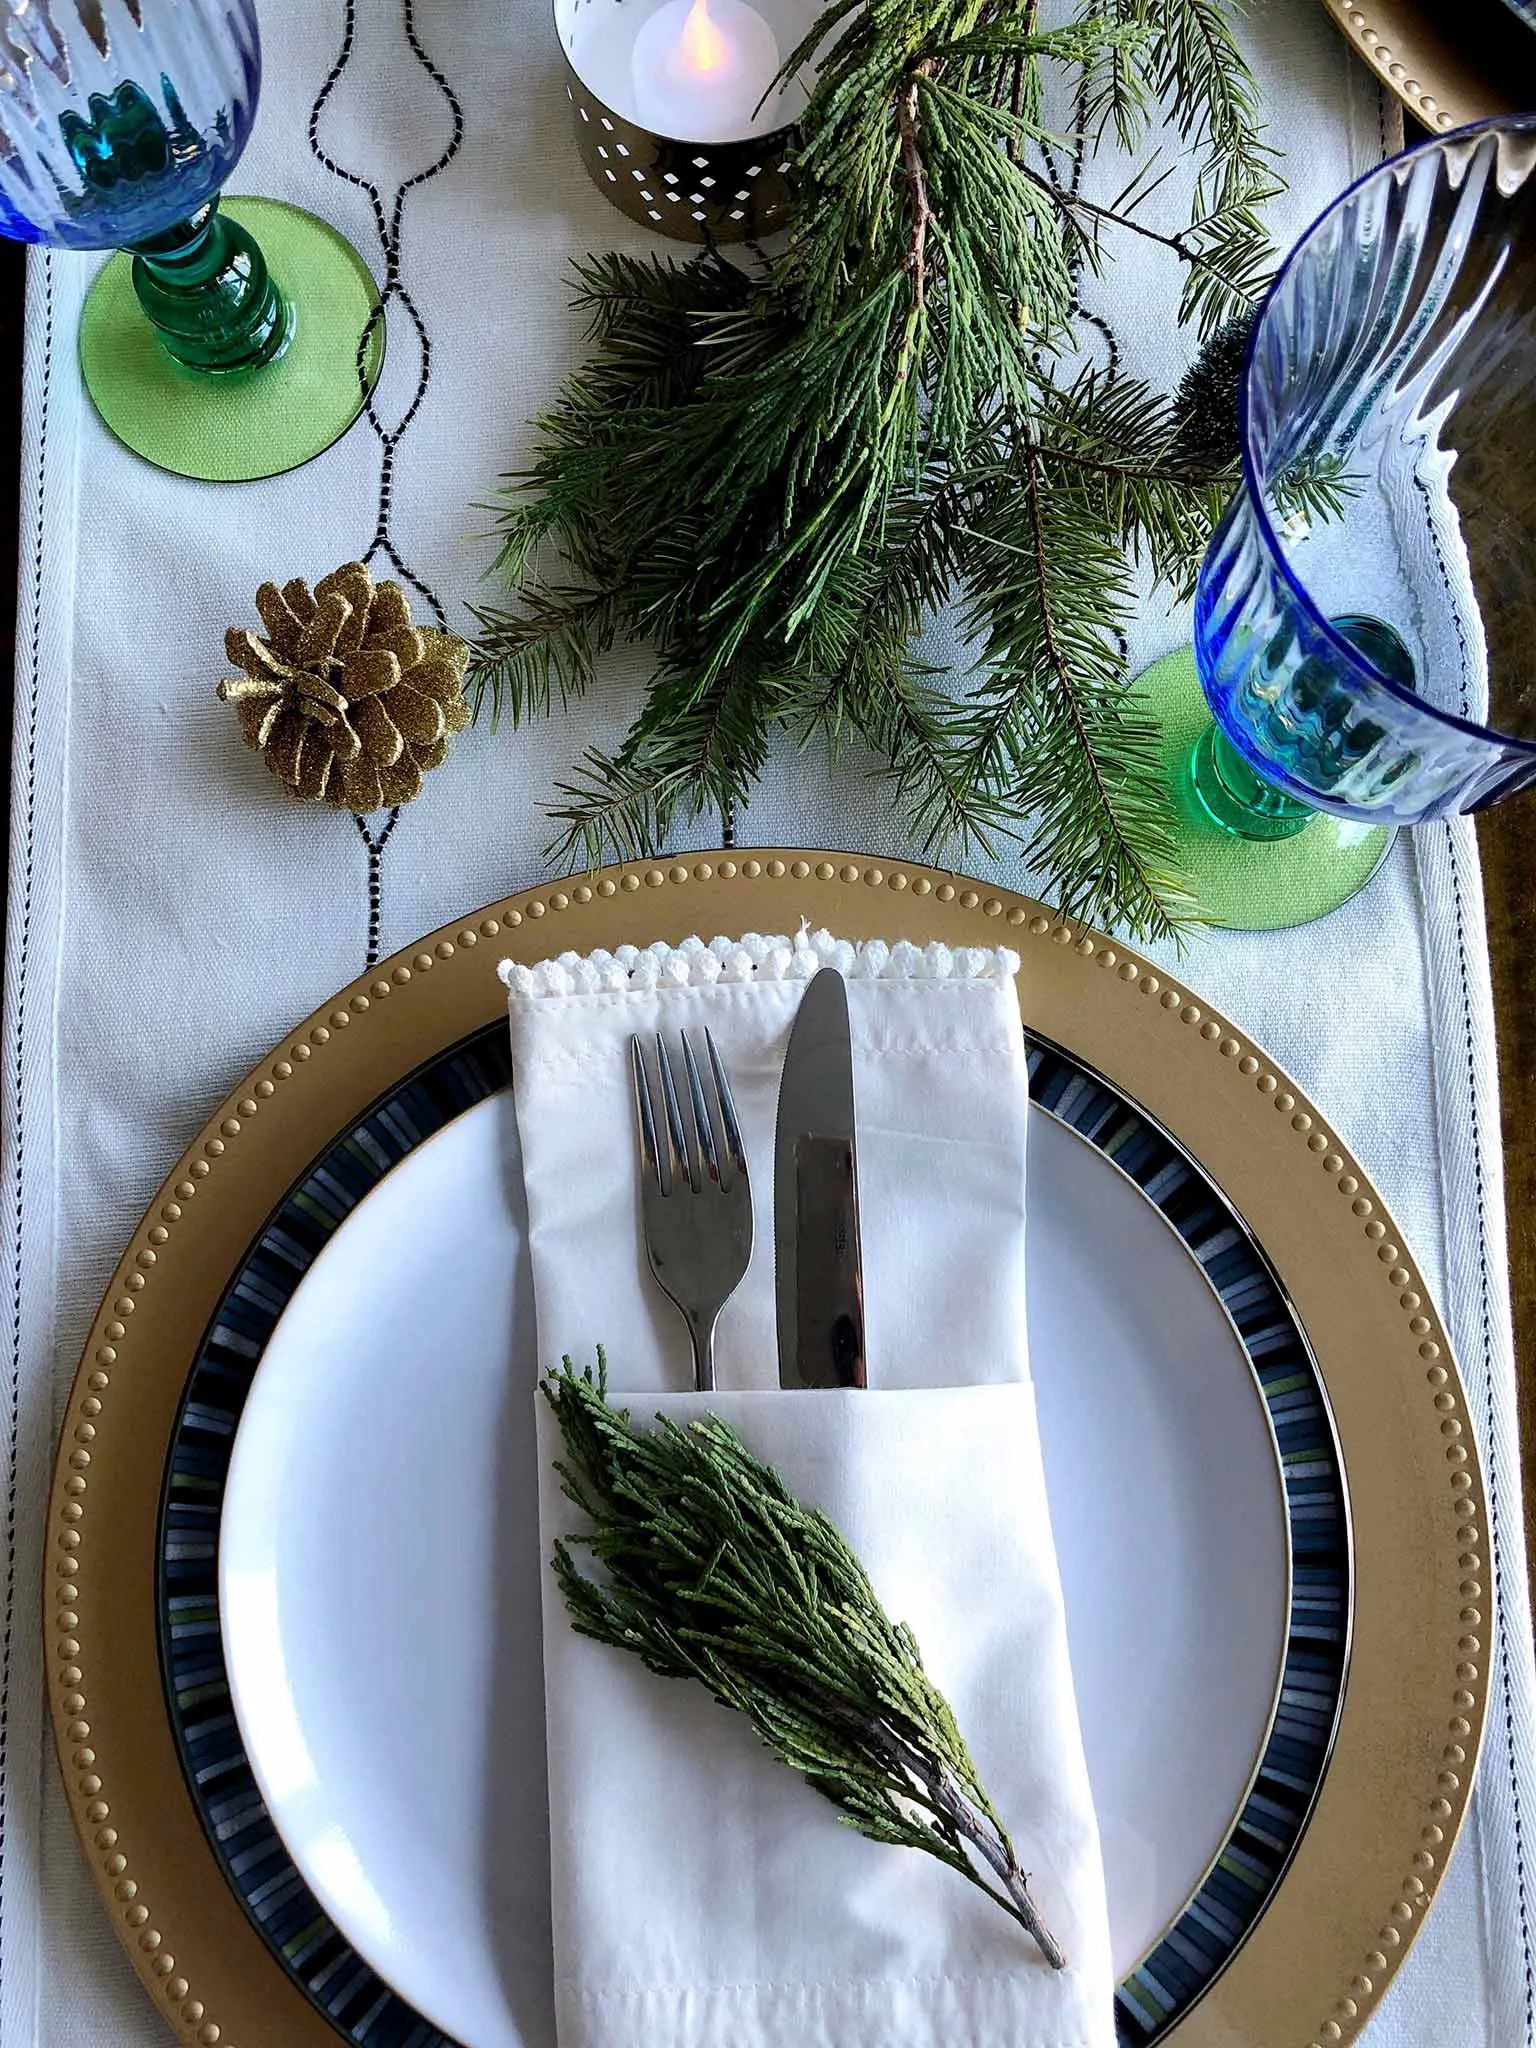 Tablescape details | How to Create a Beautiful Tablescape on a Budget | That Homebird Life Blog #christmasdecor #tablescape